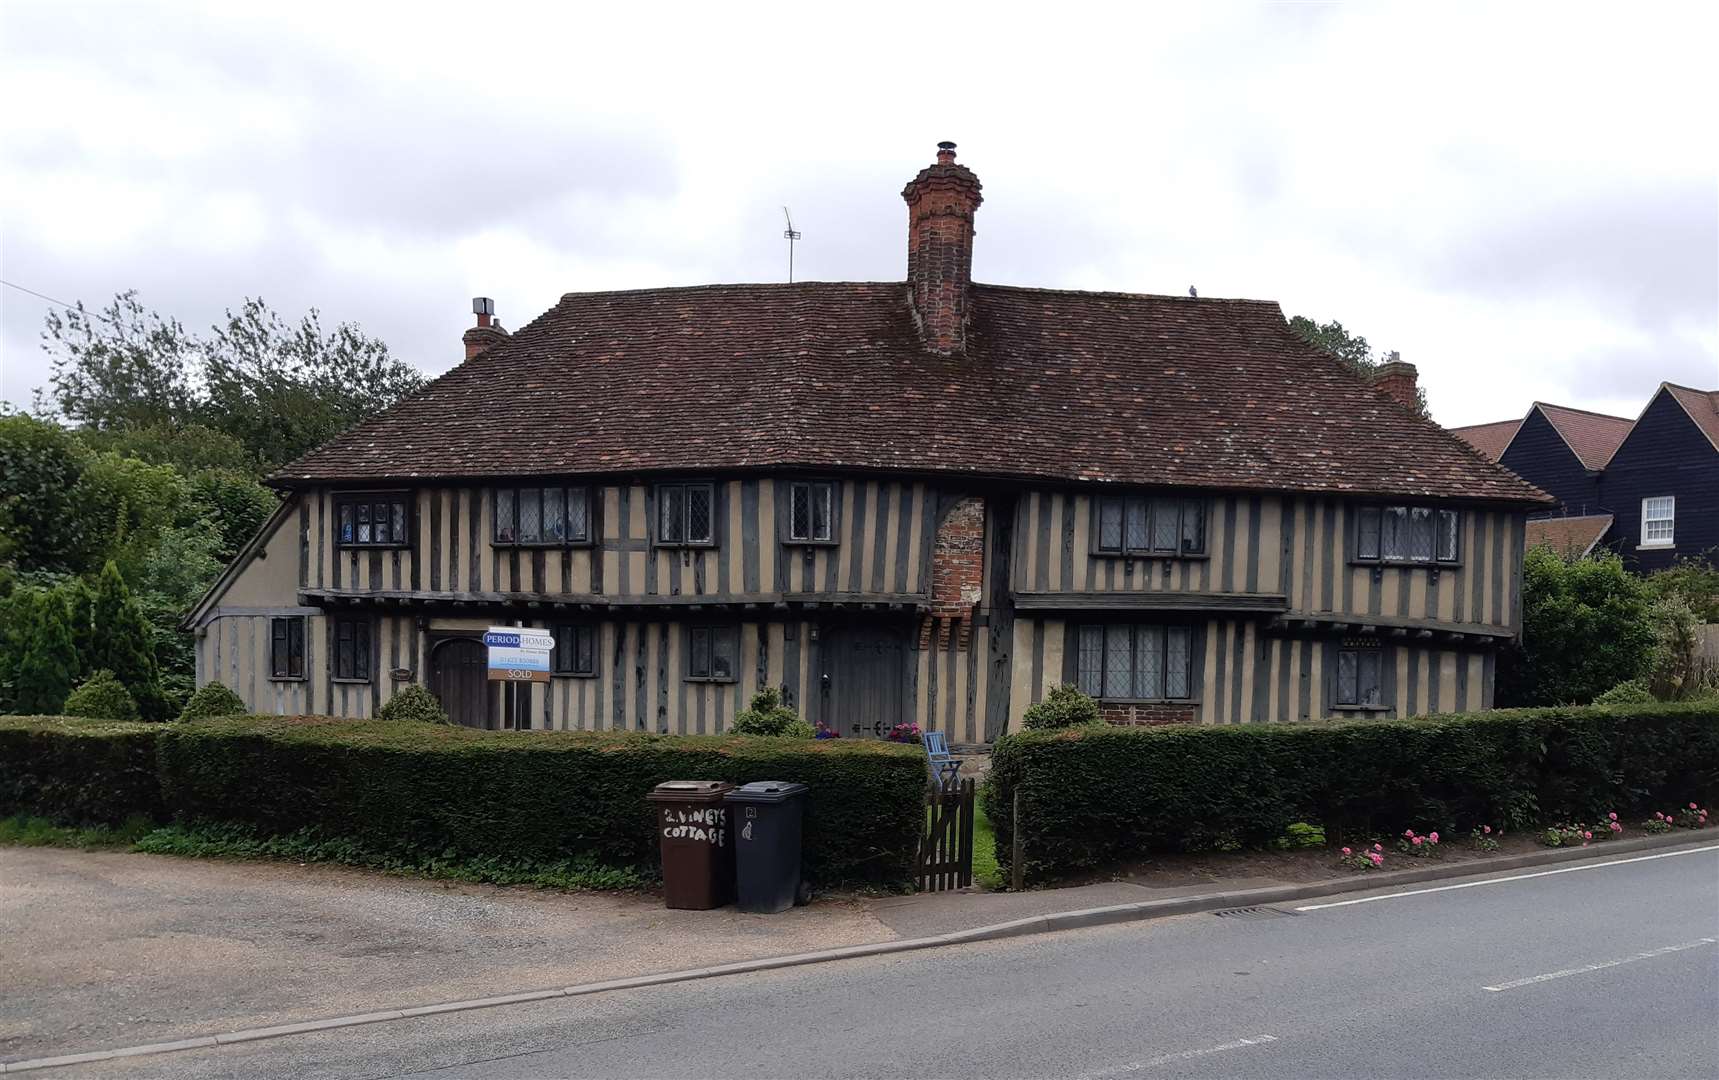 This lovely house stands on the B2163, the busy road through the village